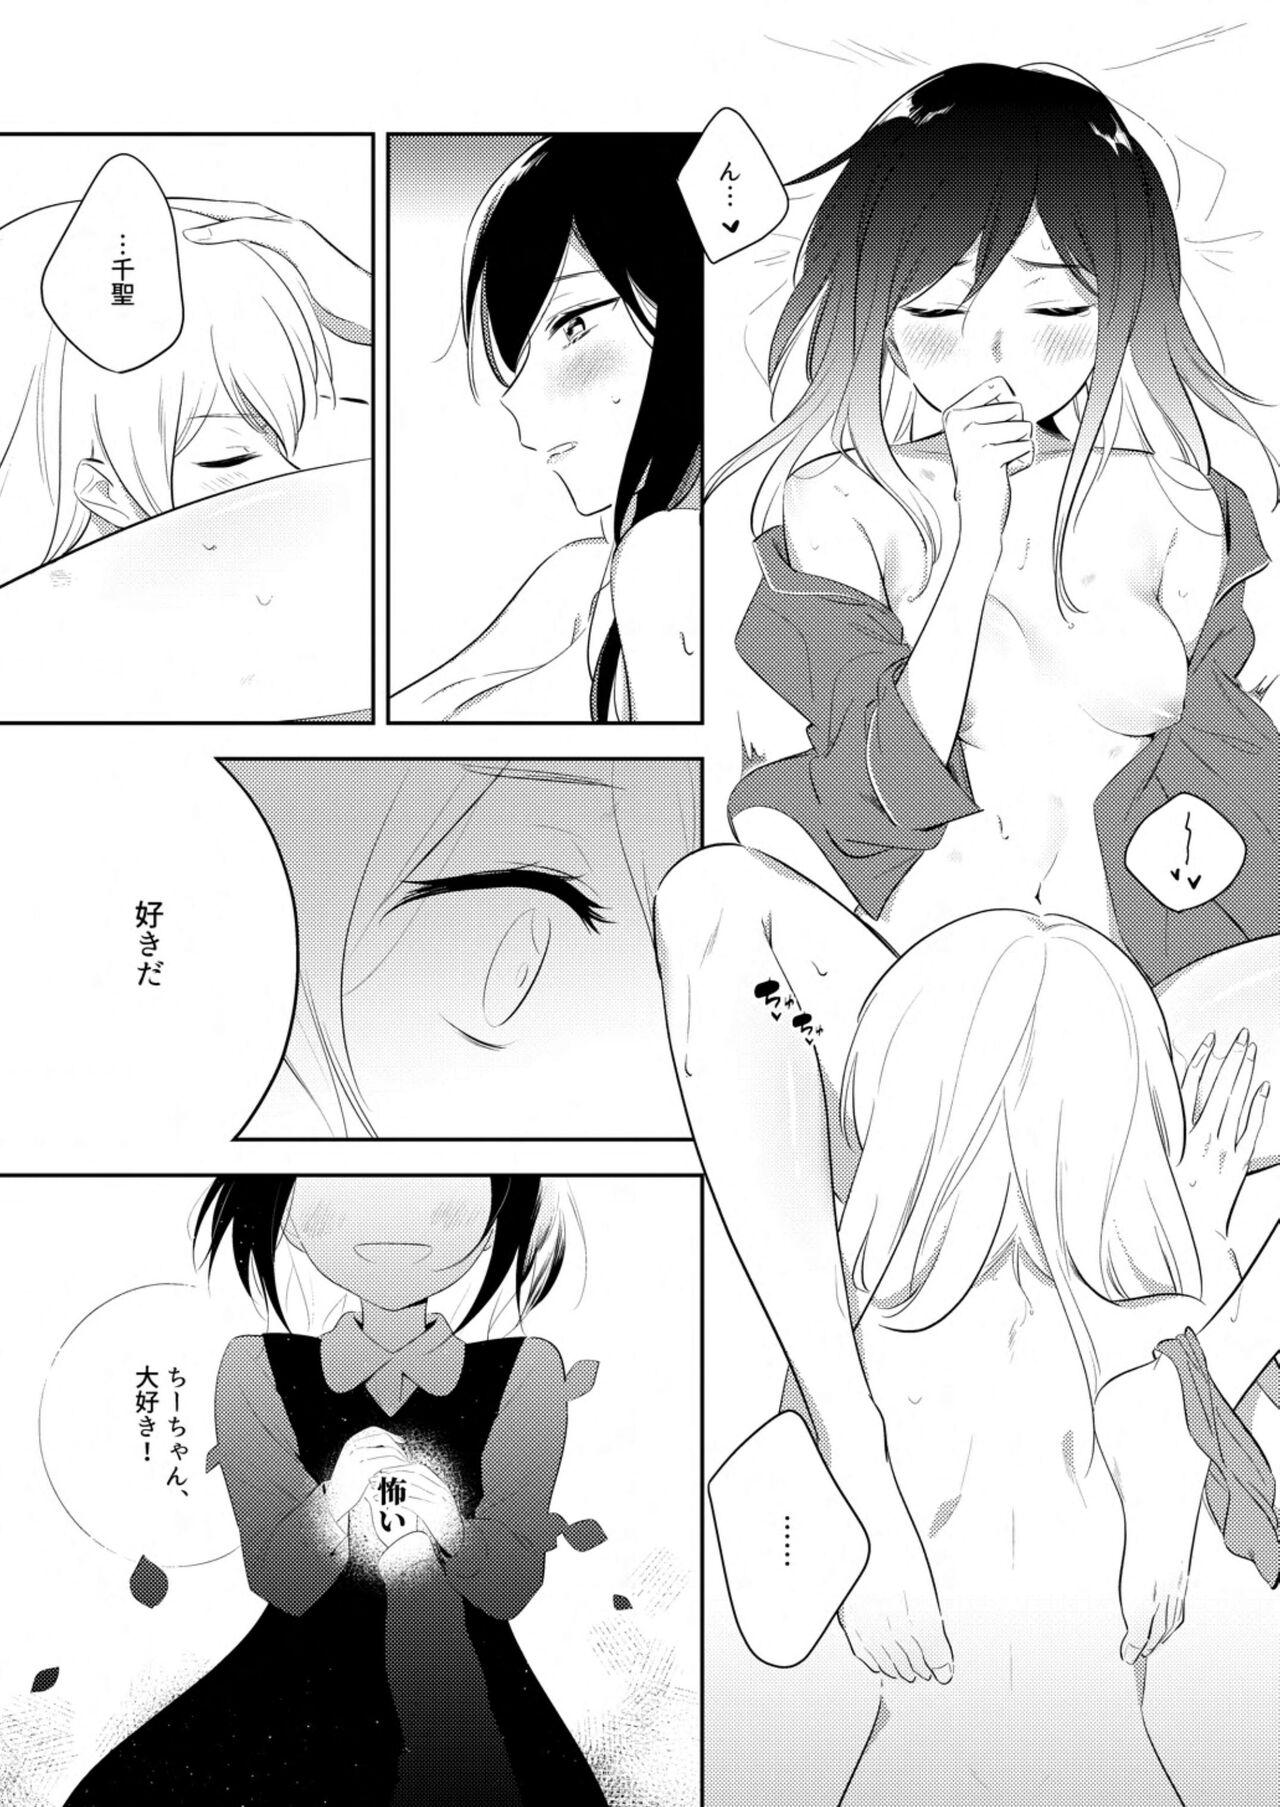 Teen Sex 《By Their Own Beauties》 - Bang dream Straight - Page 9